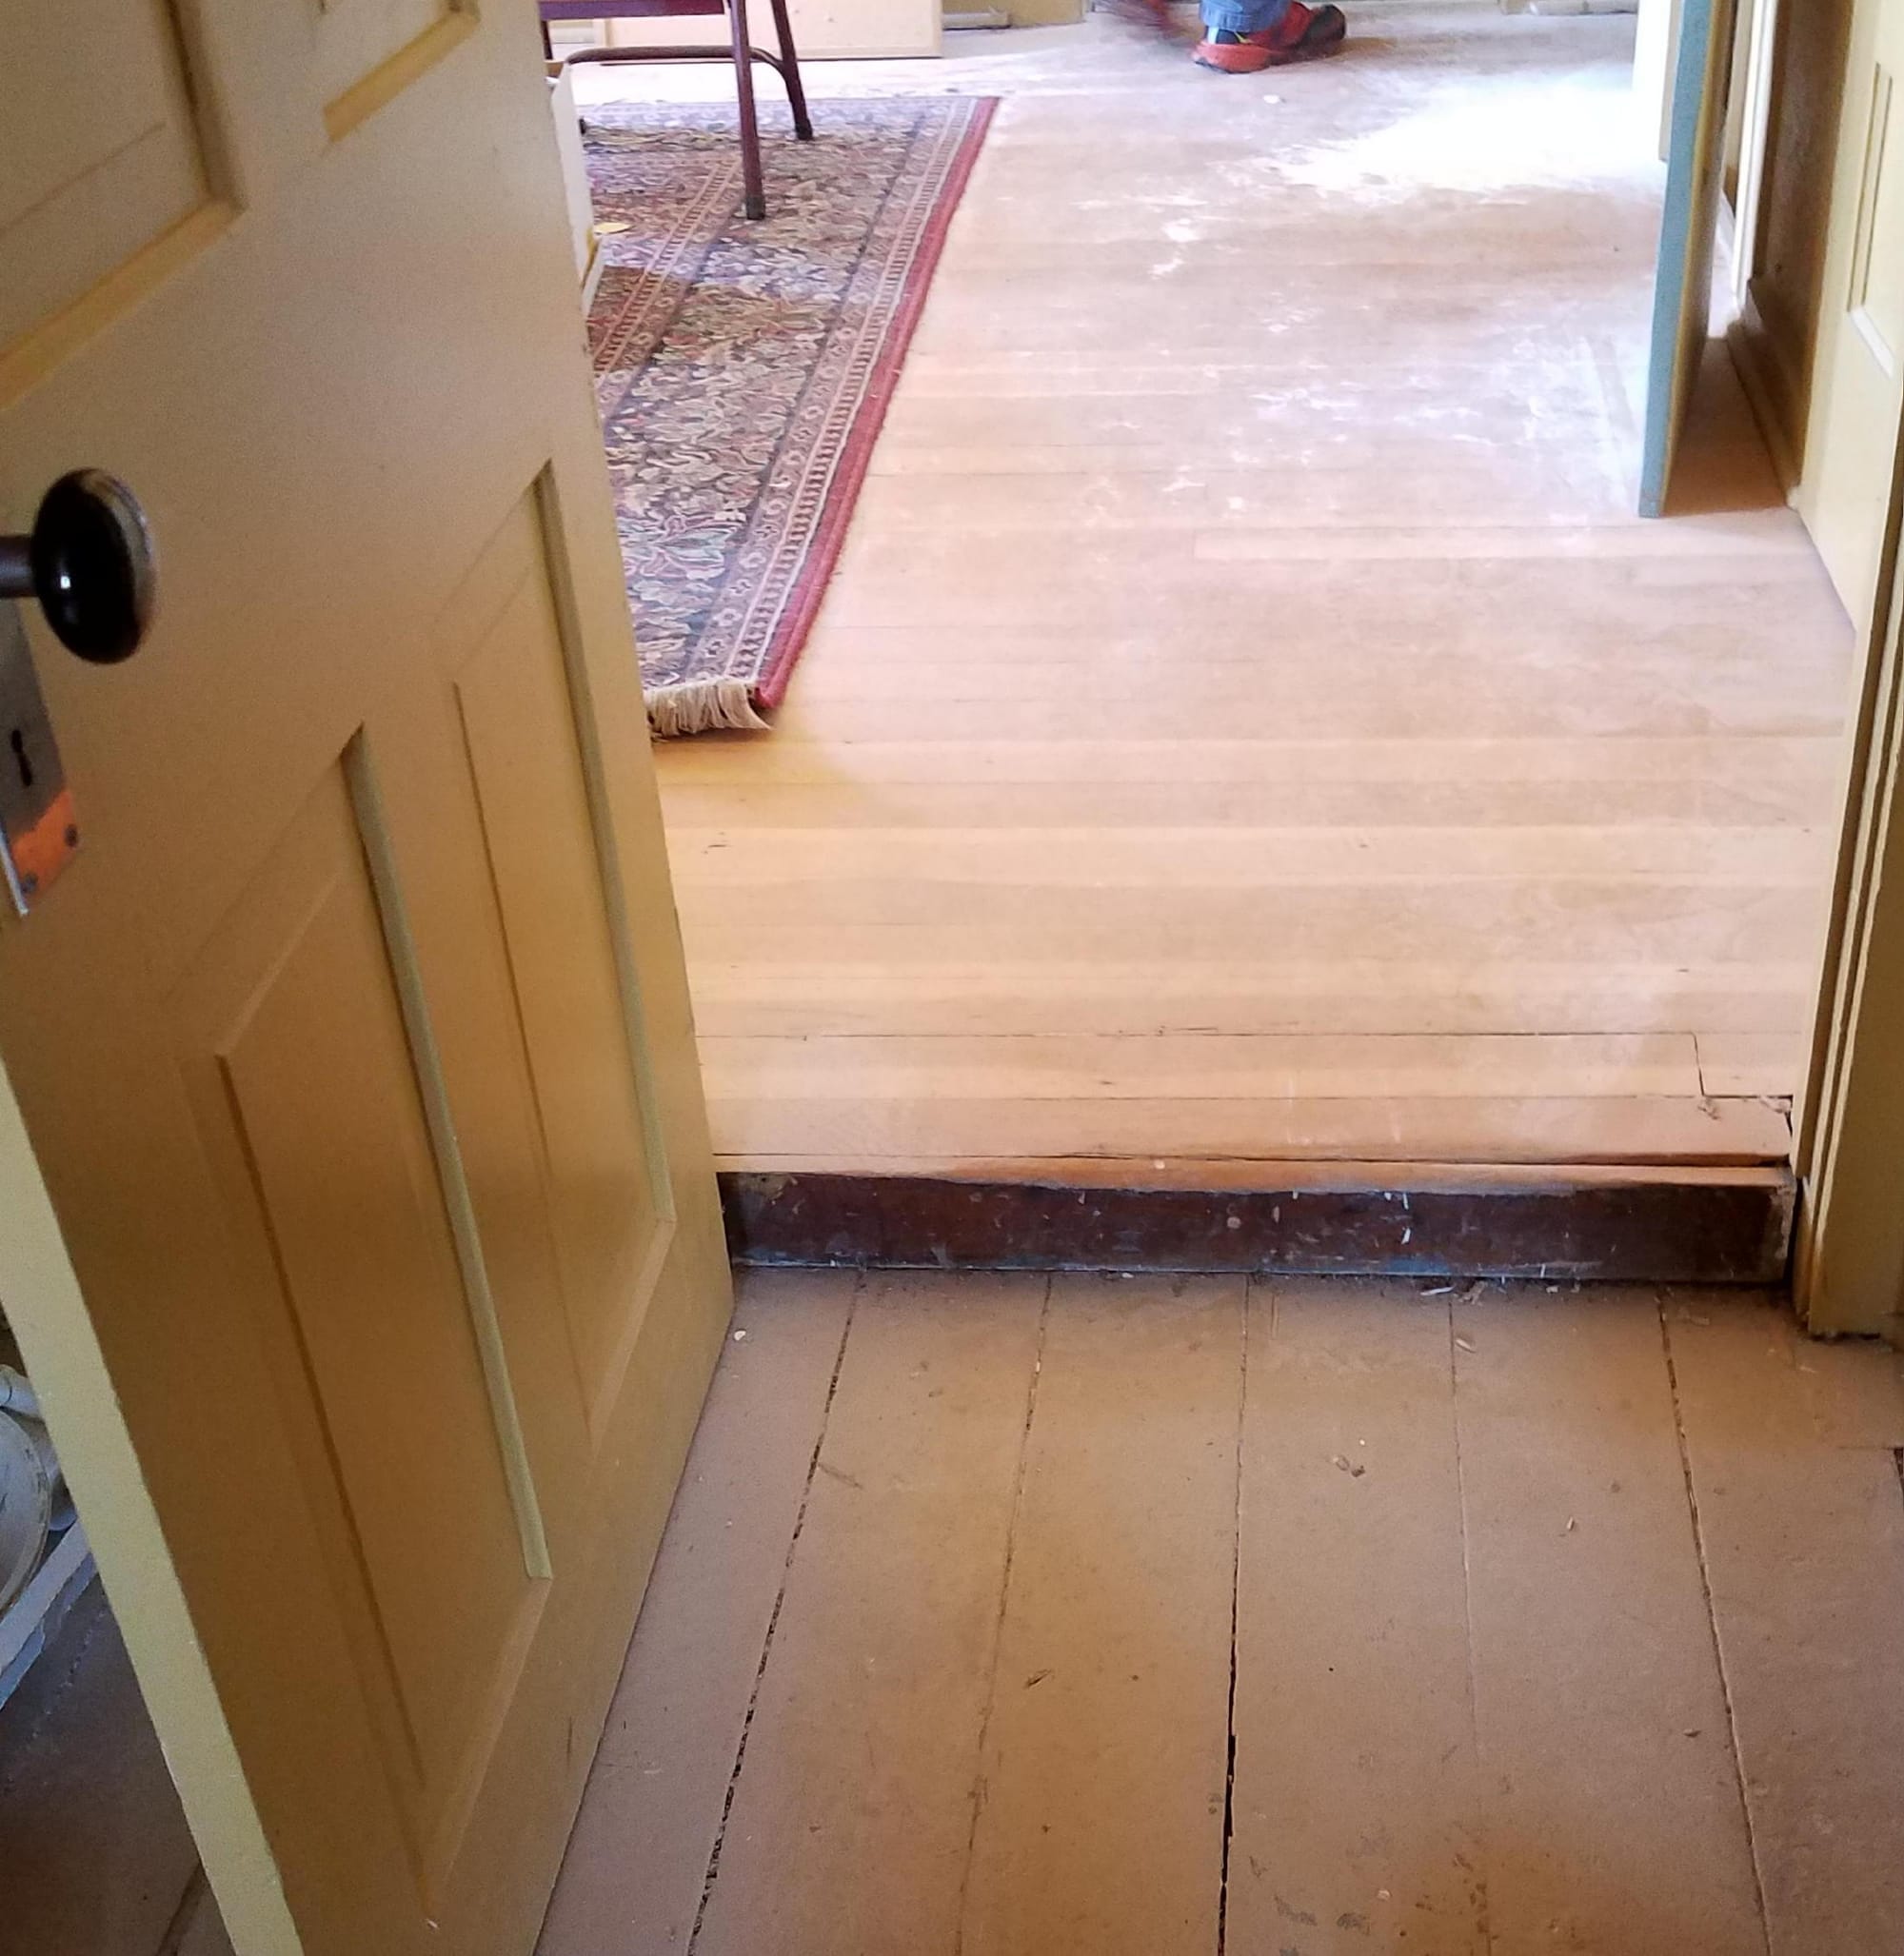 doorway showing a 2 inch difference in height of the board floors